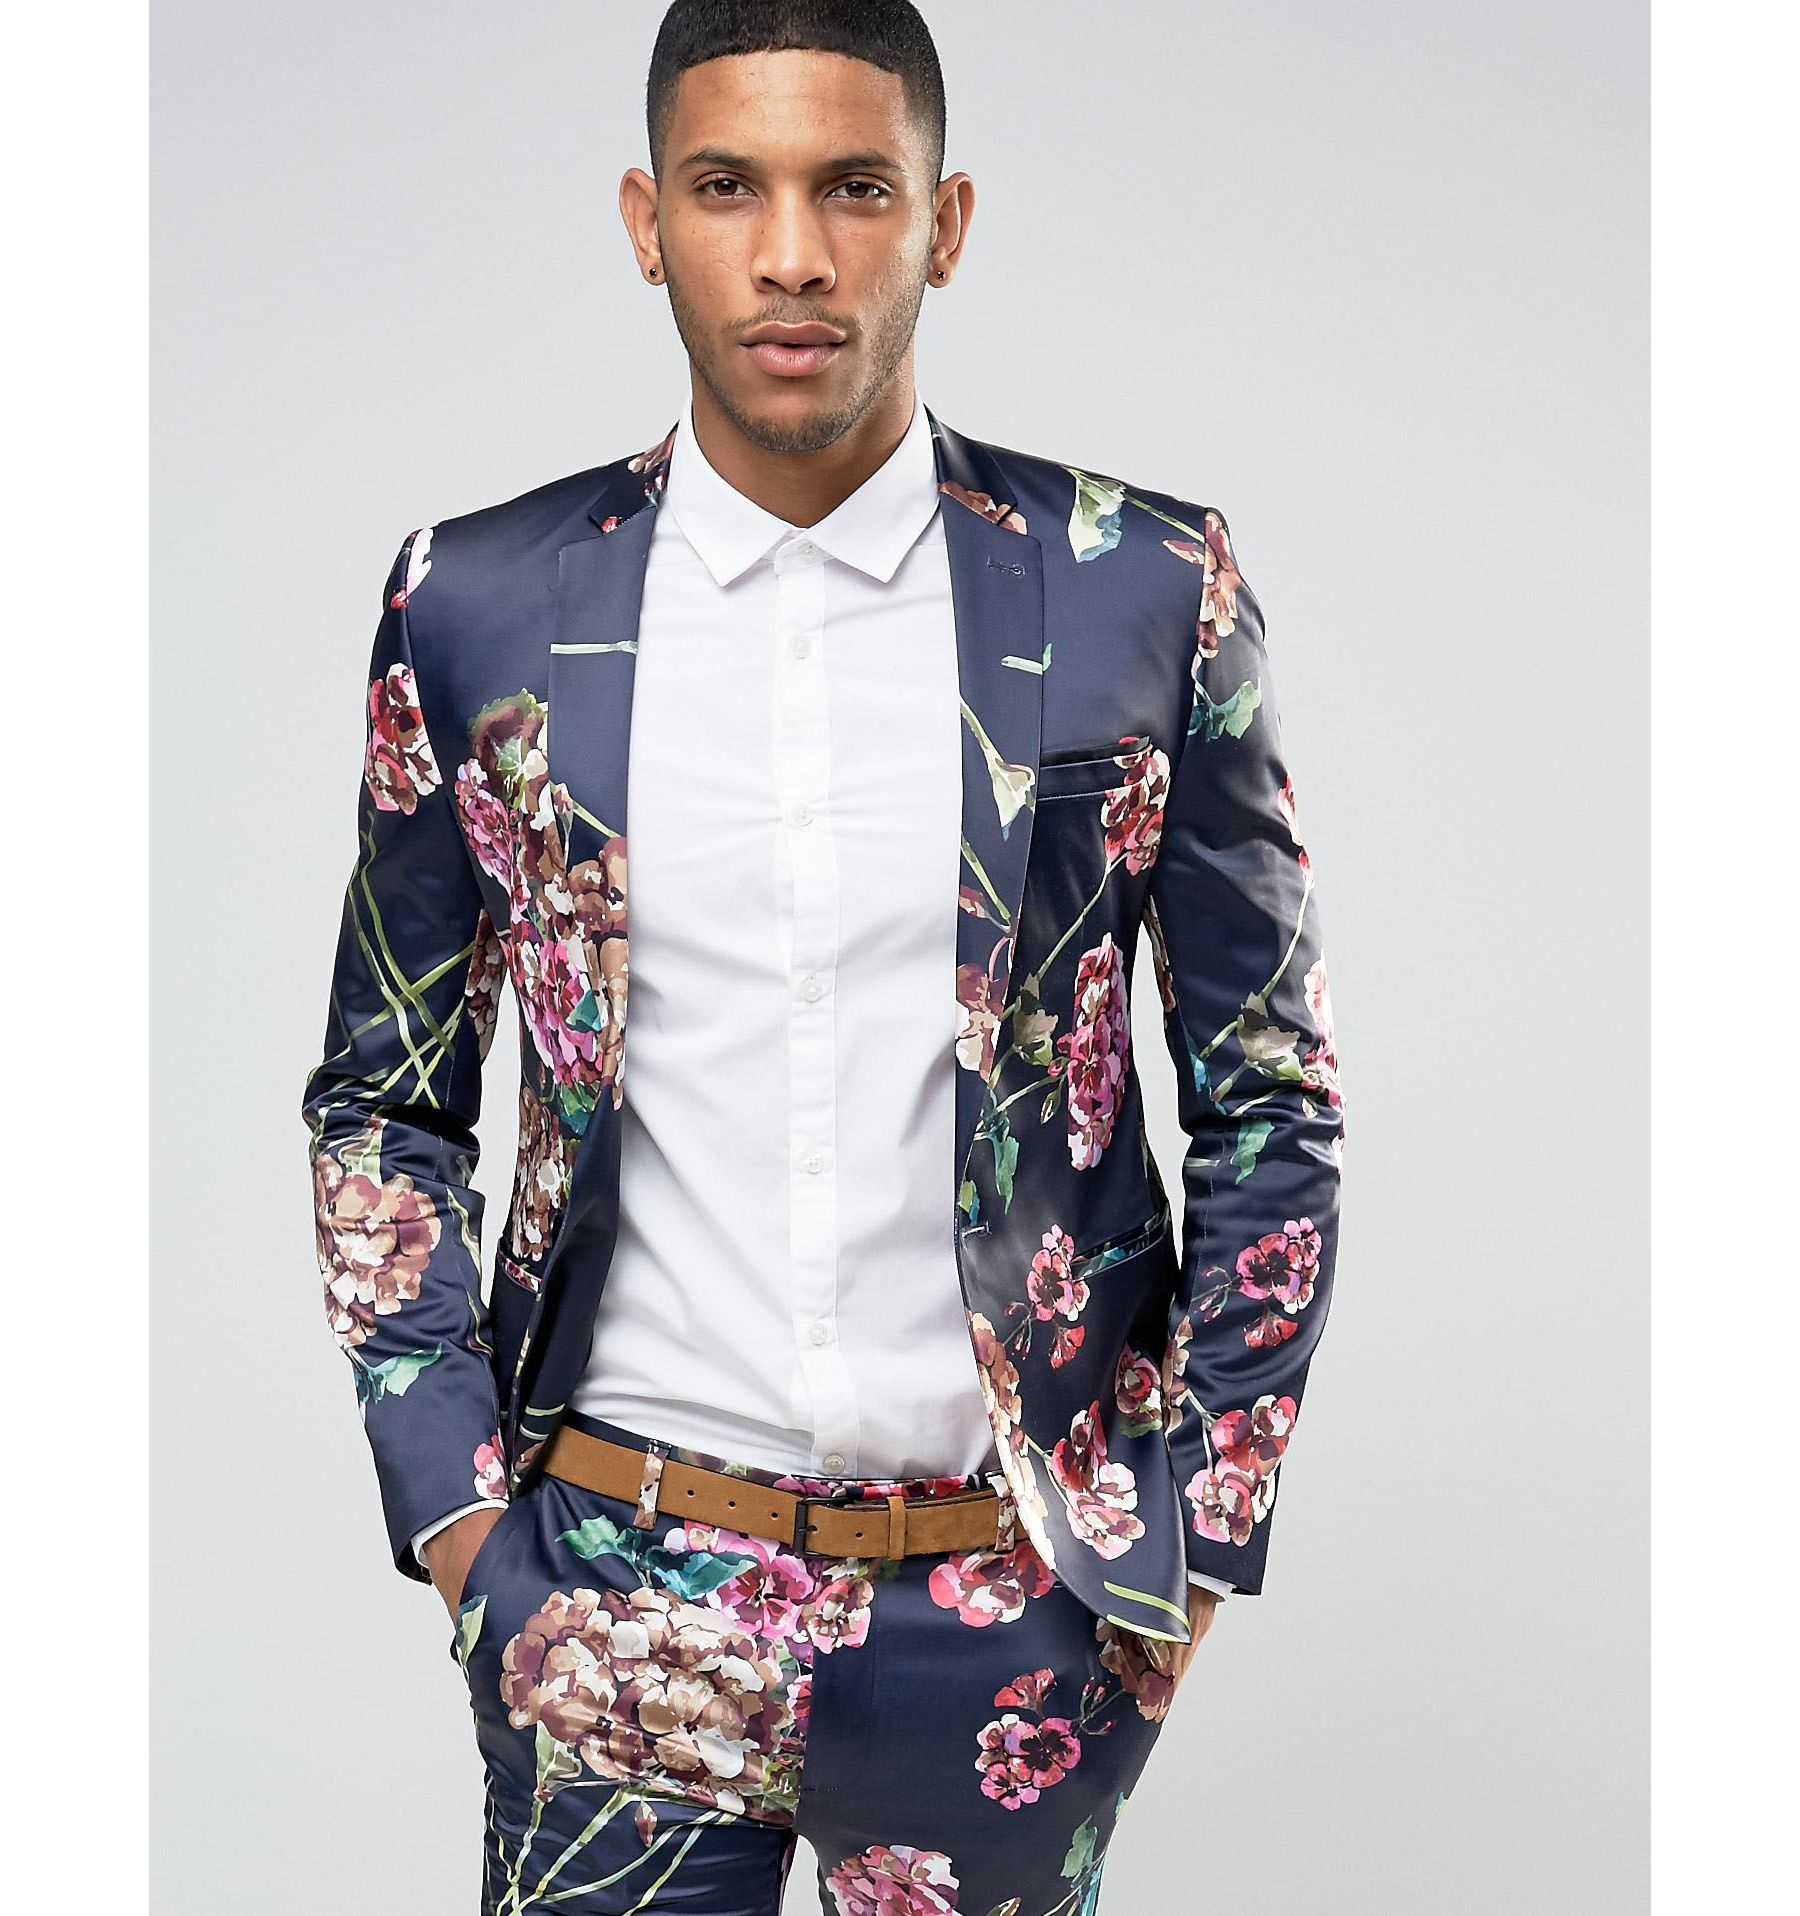 Mens Suit Shoes Asos - Asos Wedding Super Skinny Suit Jacket With Navy ...